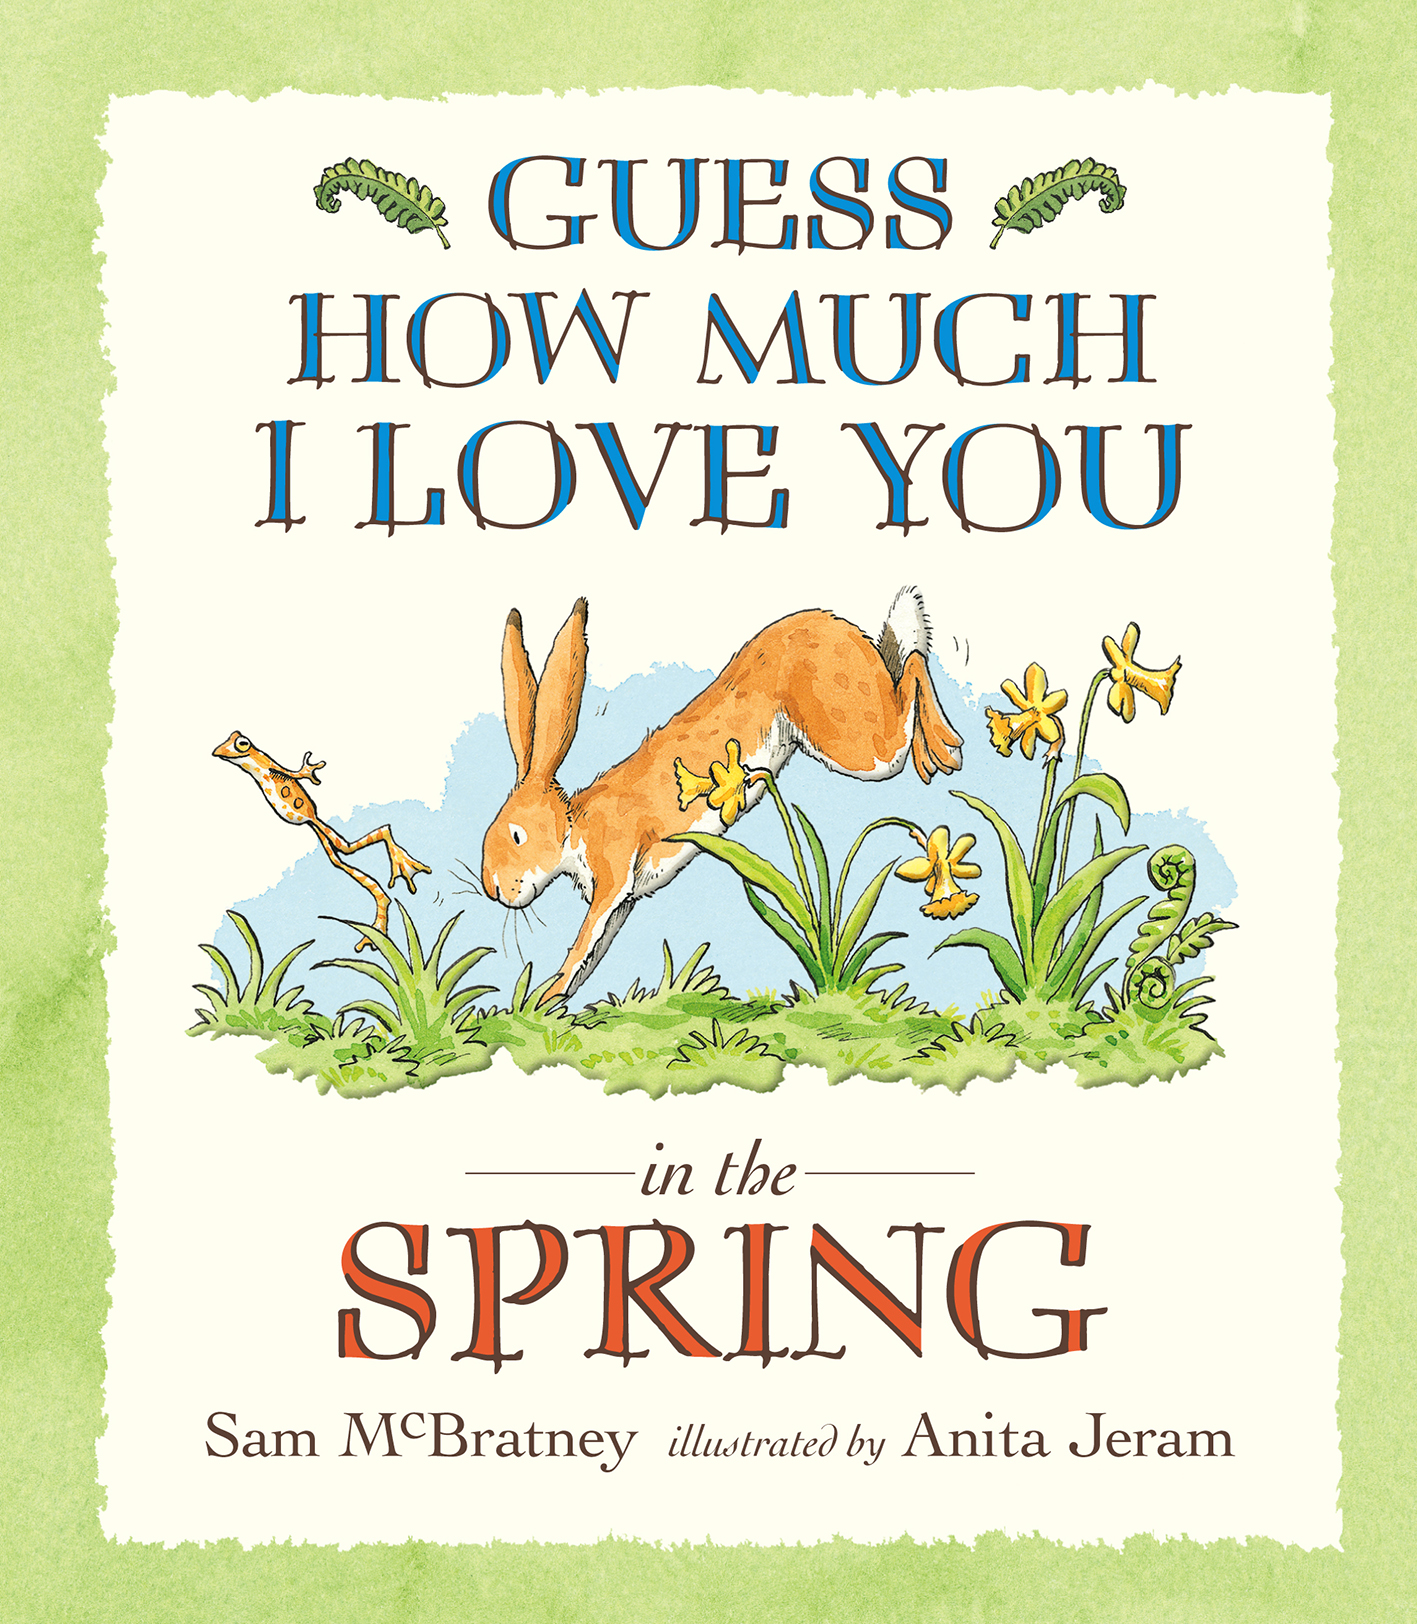 Guess-How-Much-I-Love-You-in-the-Spring